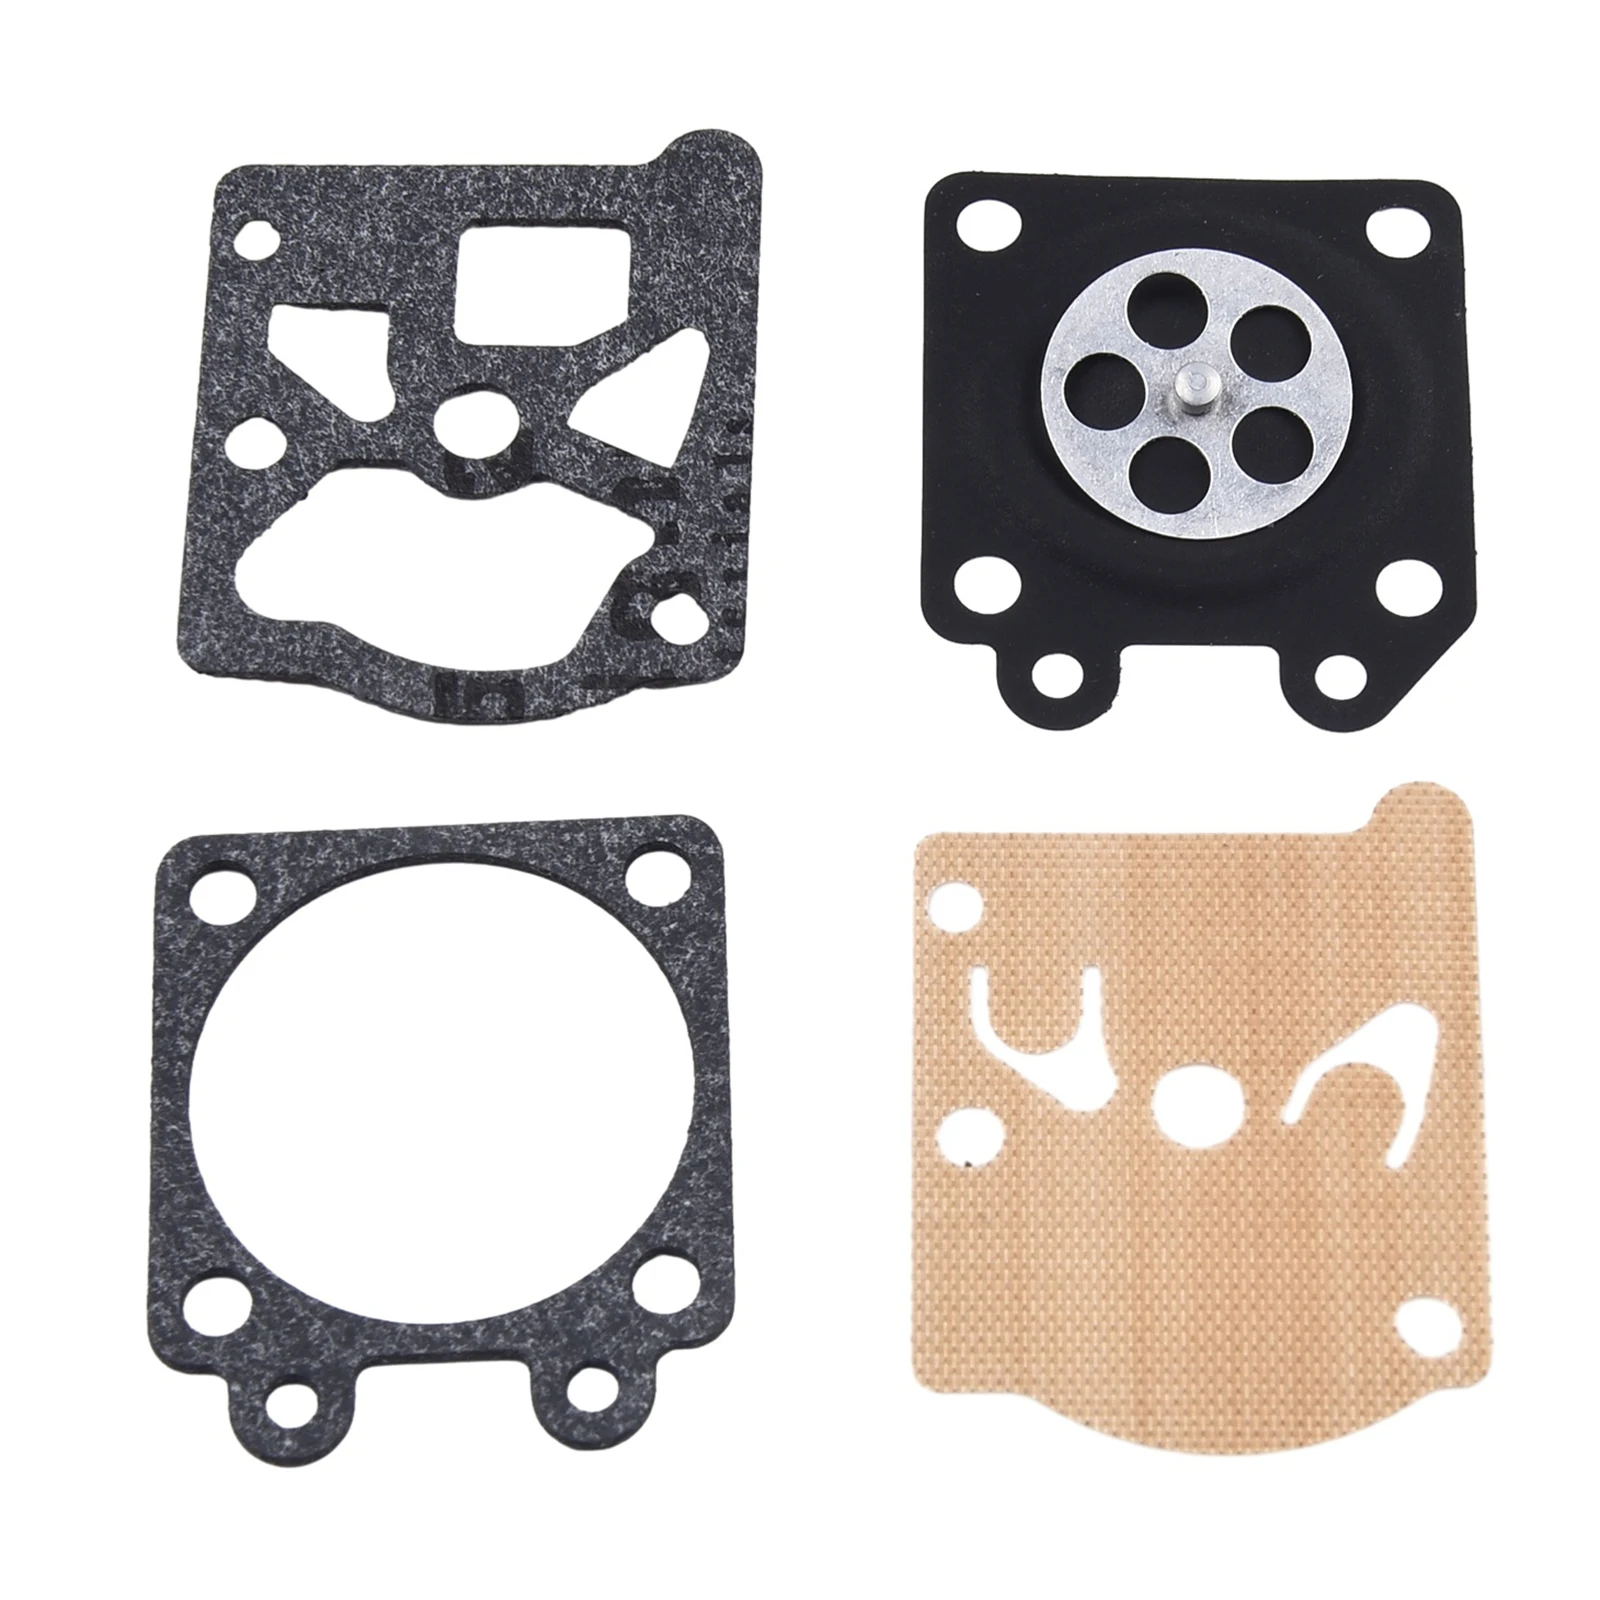 Brand New Diaphragm Accessories 1 Set 3800 5200 4500 5800 45CC 5200 58CC Carburetor Chain Saw Series Replacement chainsaw paper air filter for 5200 5800 52 58cc chainsaw fuel filter plastic